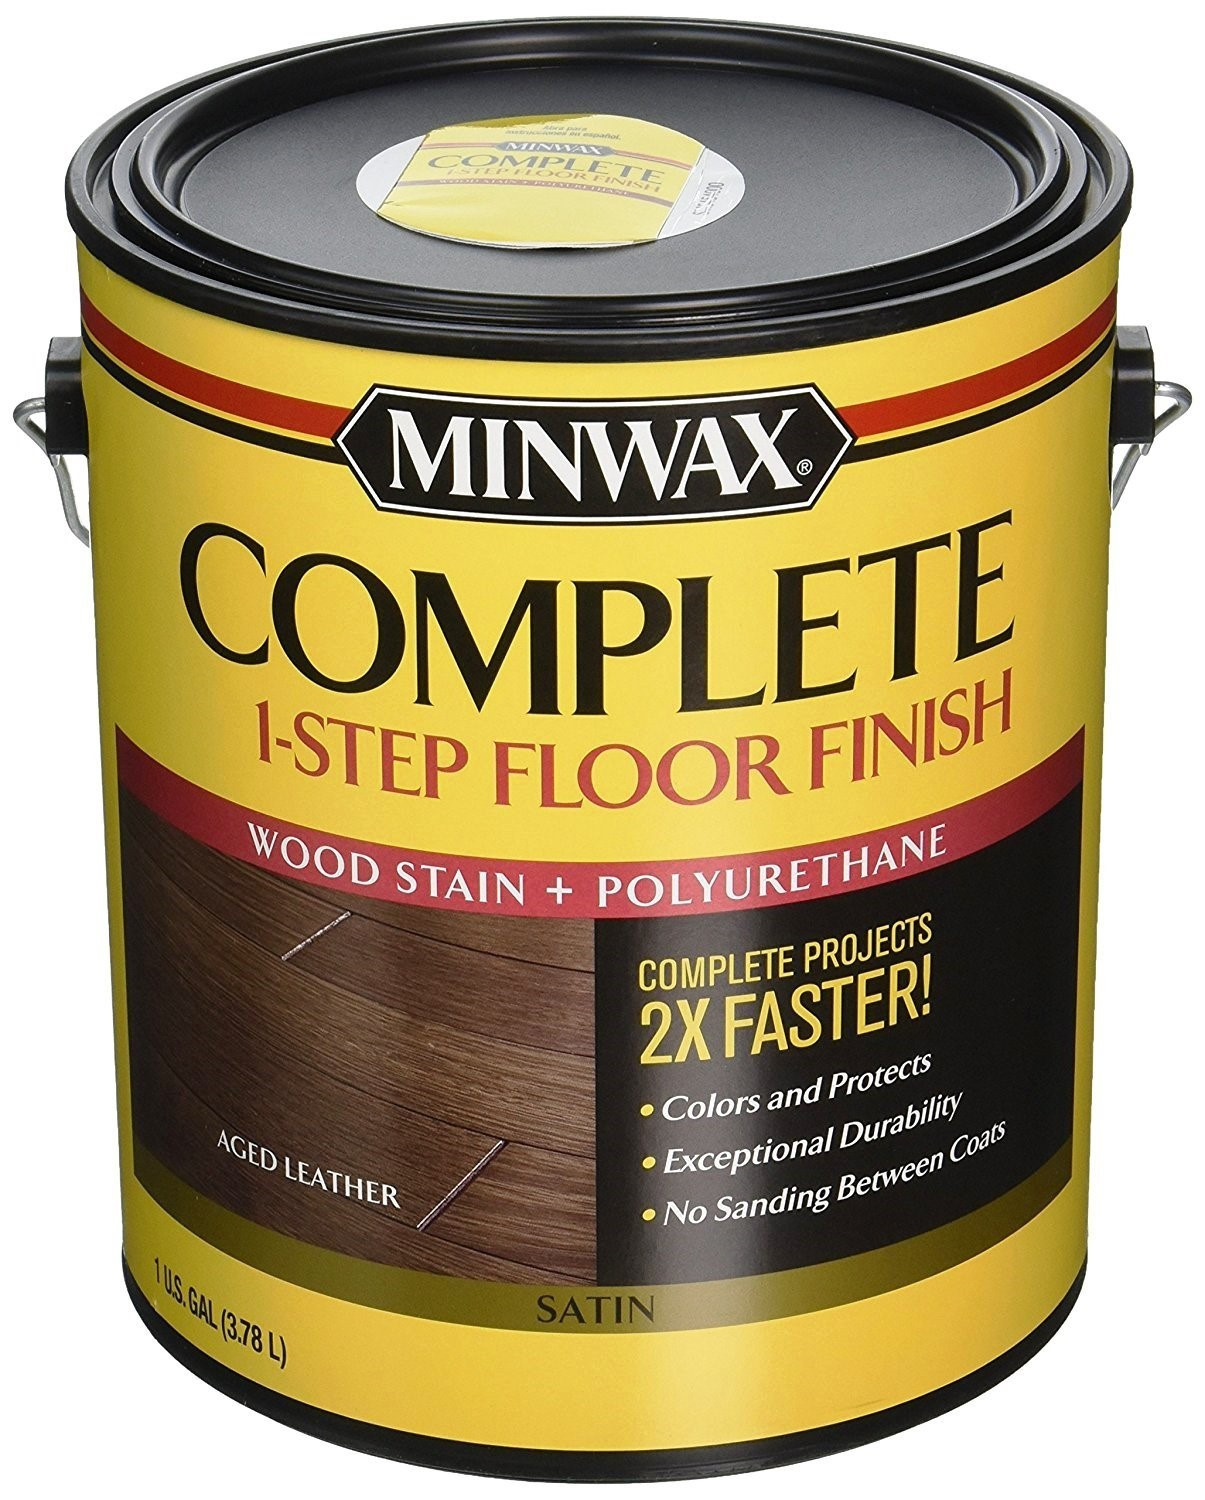 29 Unique Hardwood Floor Colors 2018 2024 free download hardwood floor colors 2018 of 15 unique hardwood floor stain colors photos dizpos com within hardwood floor stain colors awesome buy the minwax minwax plete e step satin floor finish collect